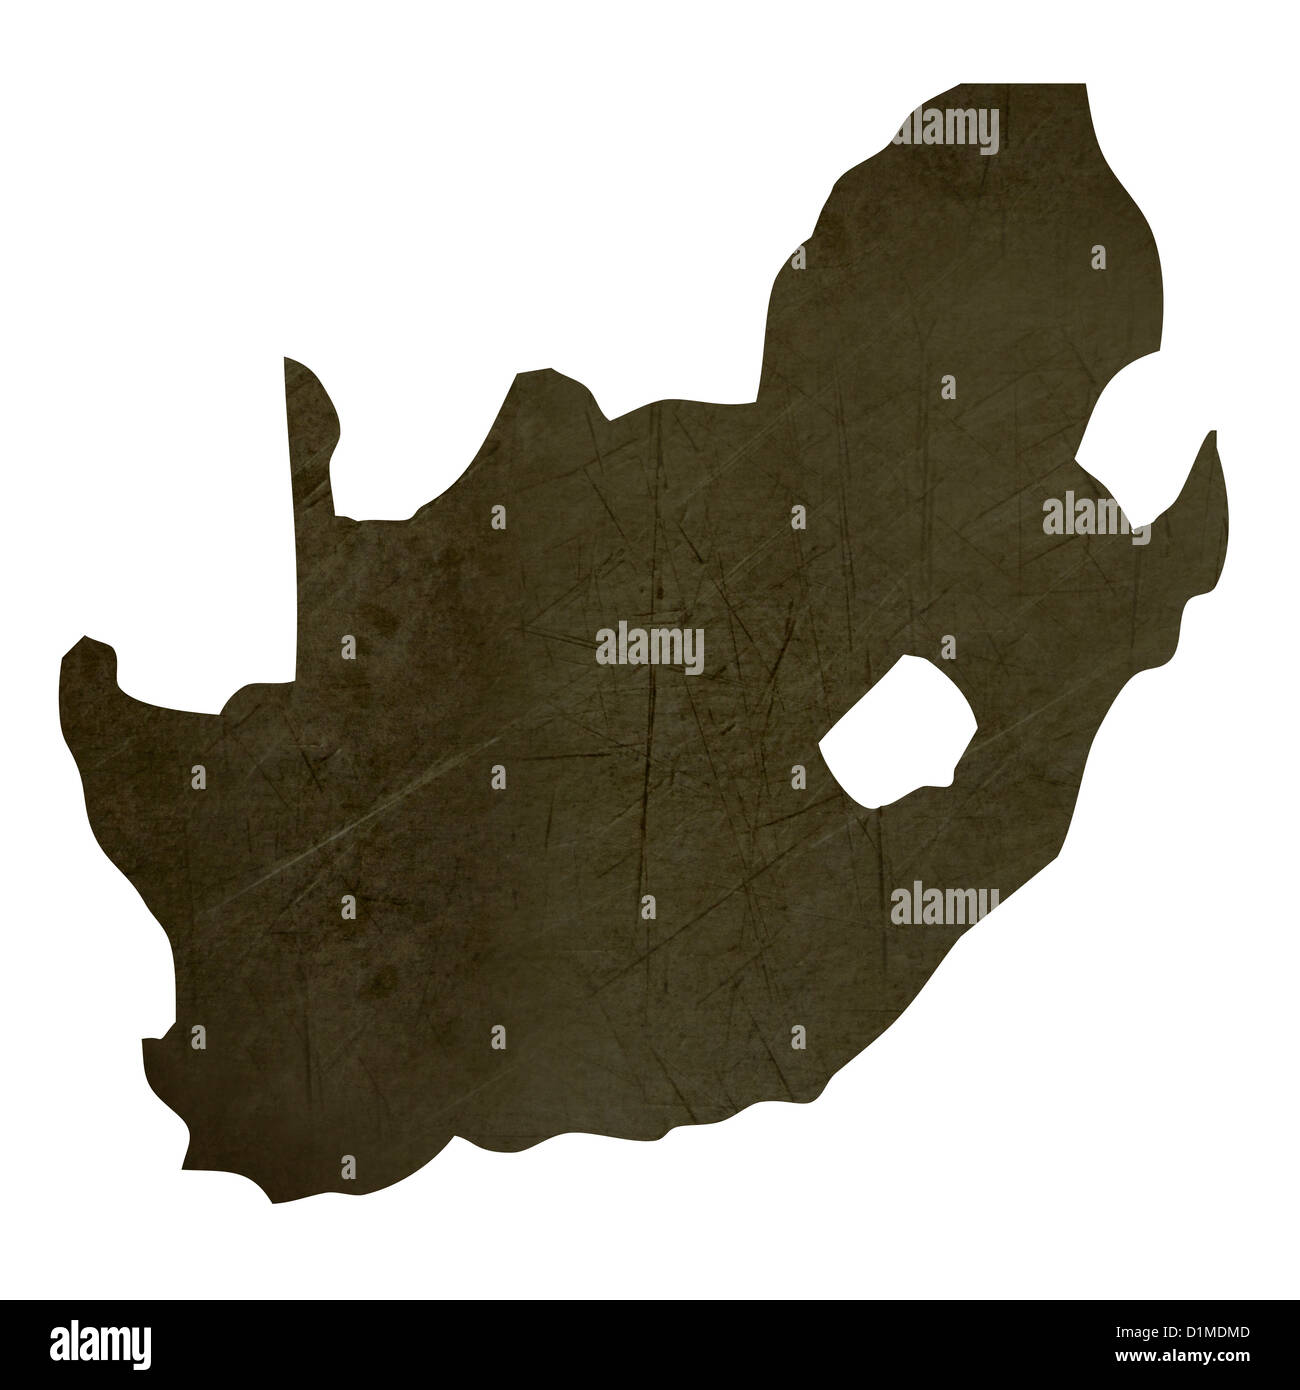 Dark silhouetted and textured map of South Africa isolated on white background. Stock Photo